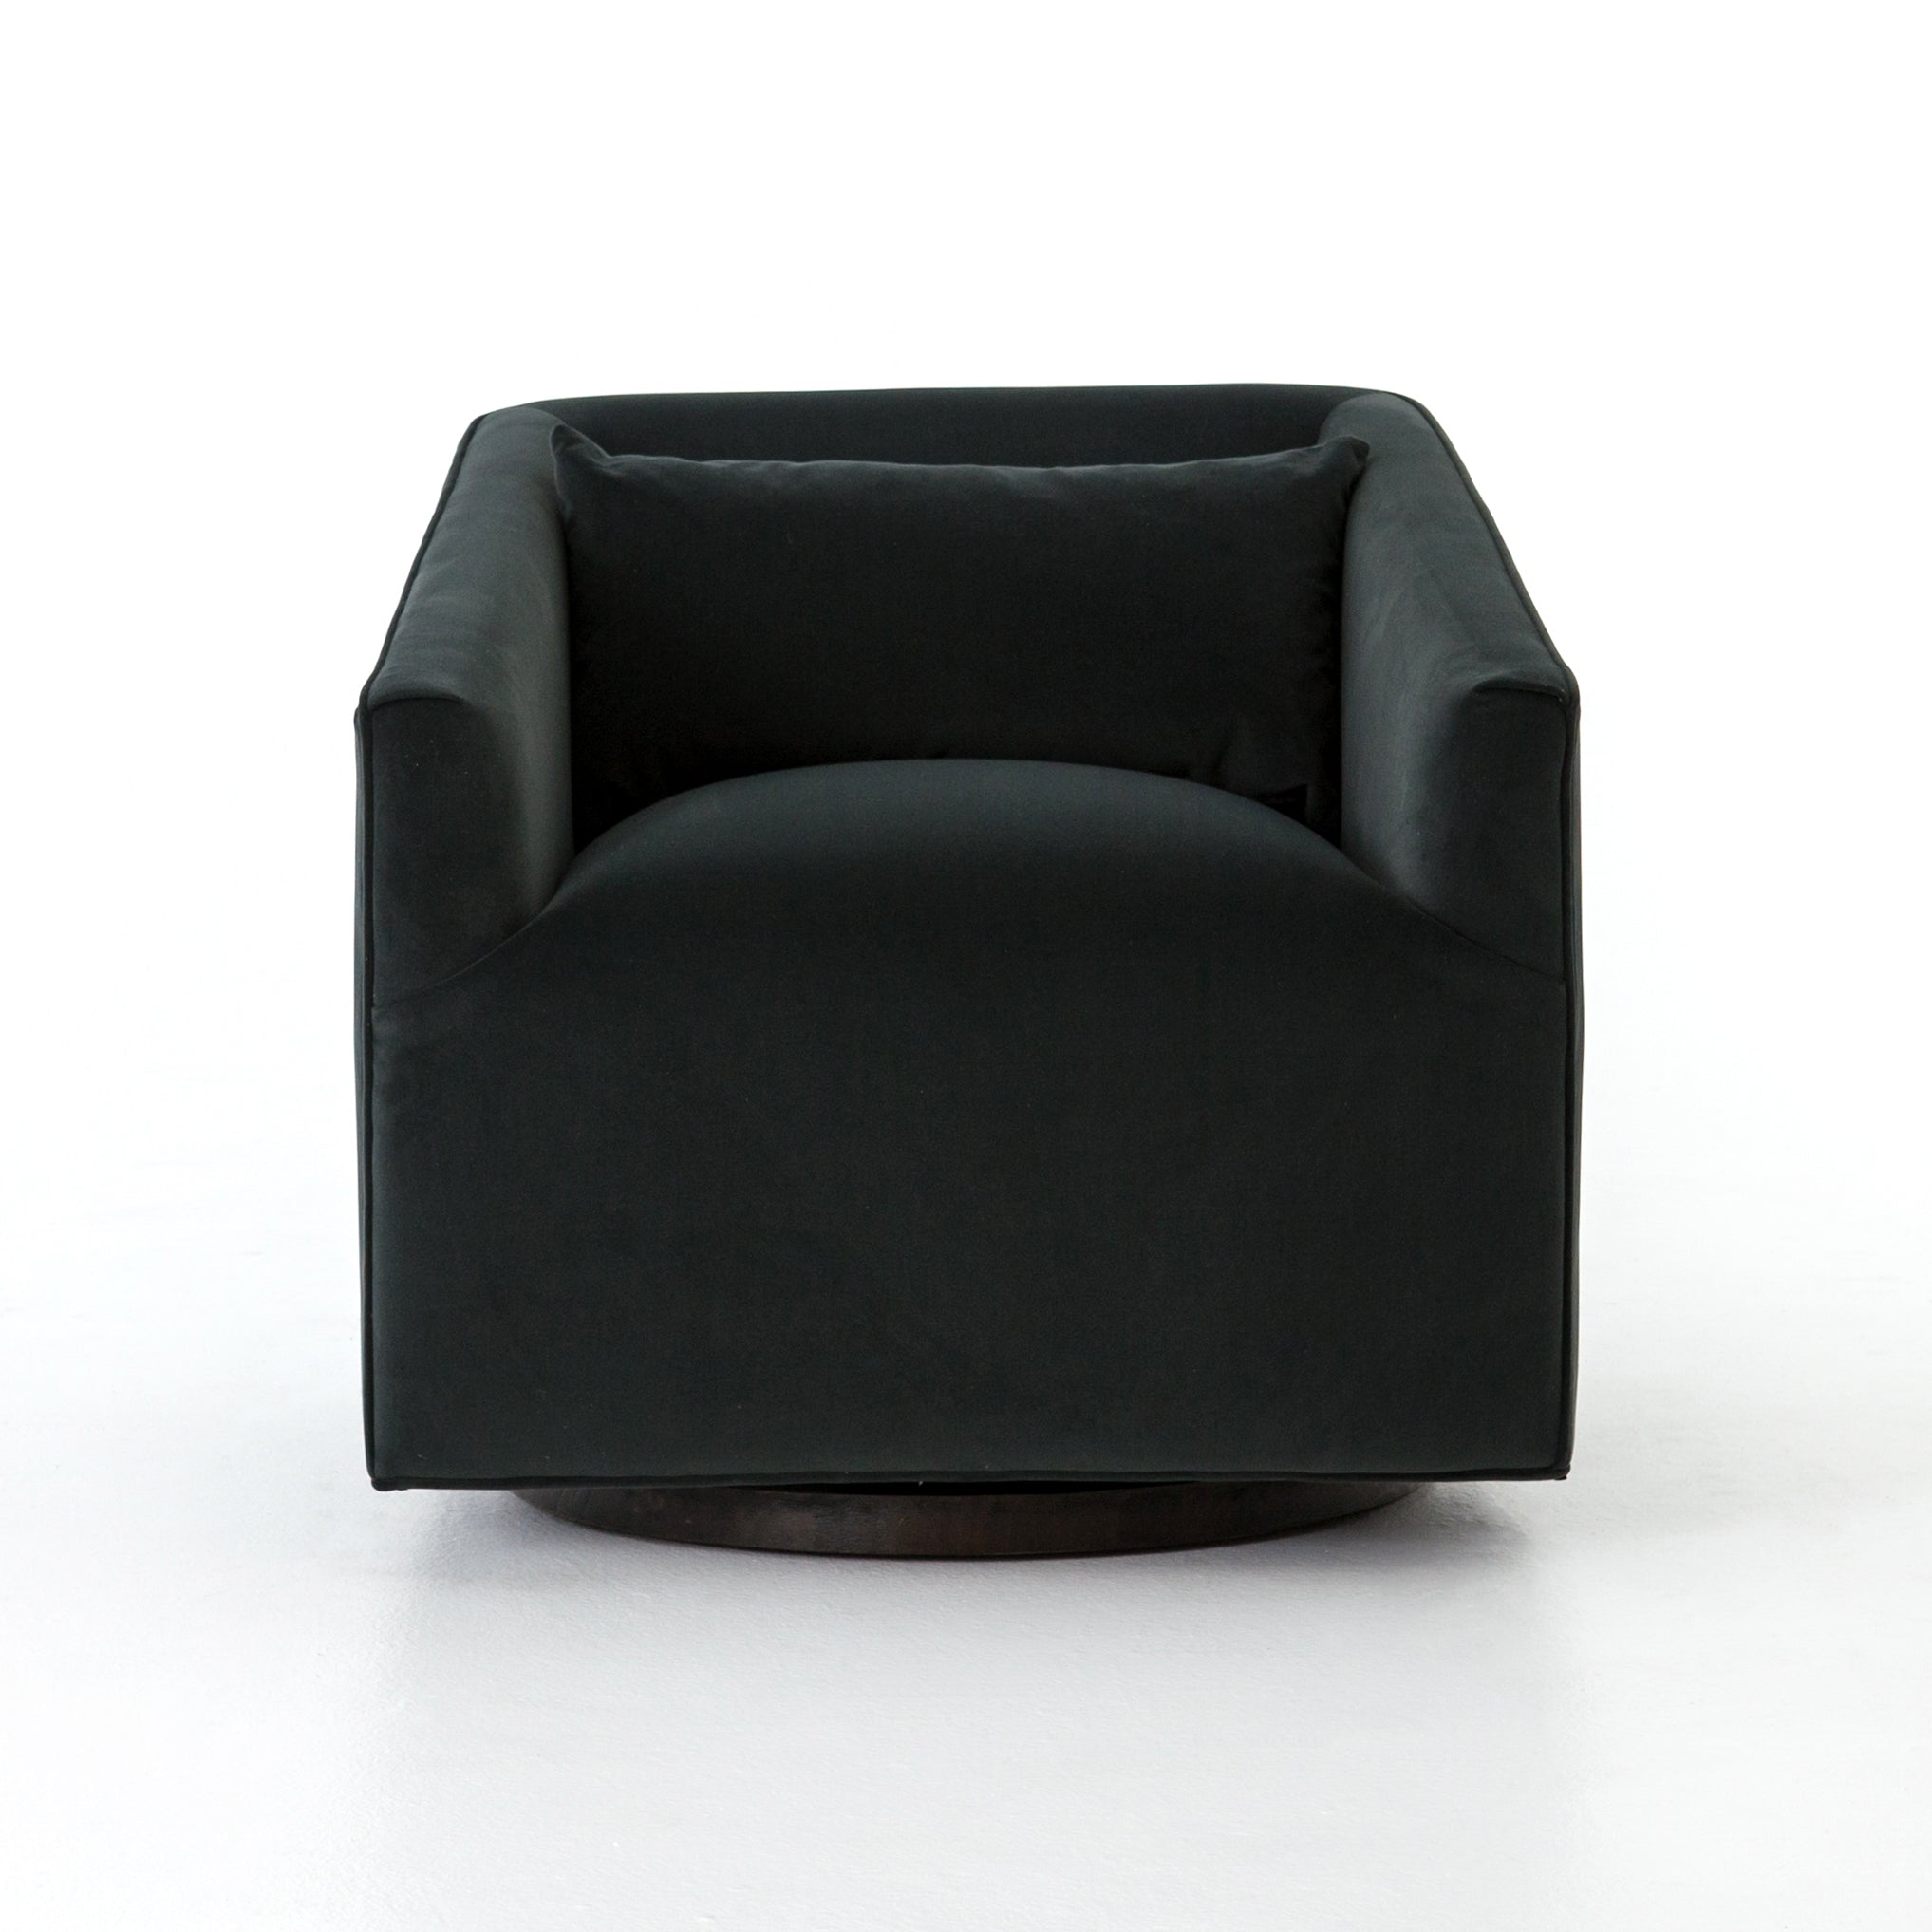 The York Swivel Chair is small in scale, but substantial in comfort. The chair's precisely-tailored seating in a modern smoky velvet offers a touch of light swivel movement. The base of the chair has a moss-tinged charcoal hue adding a fashion-forward twist.